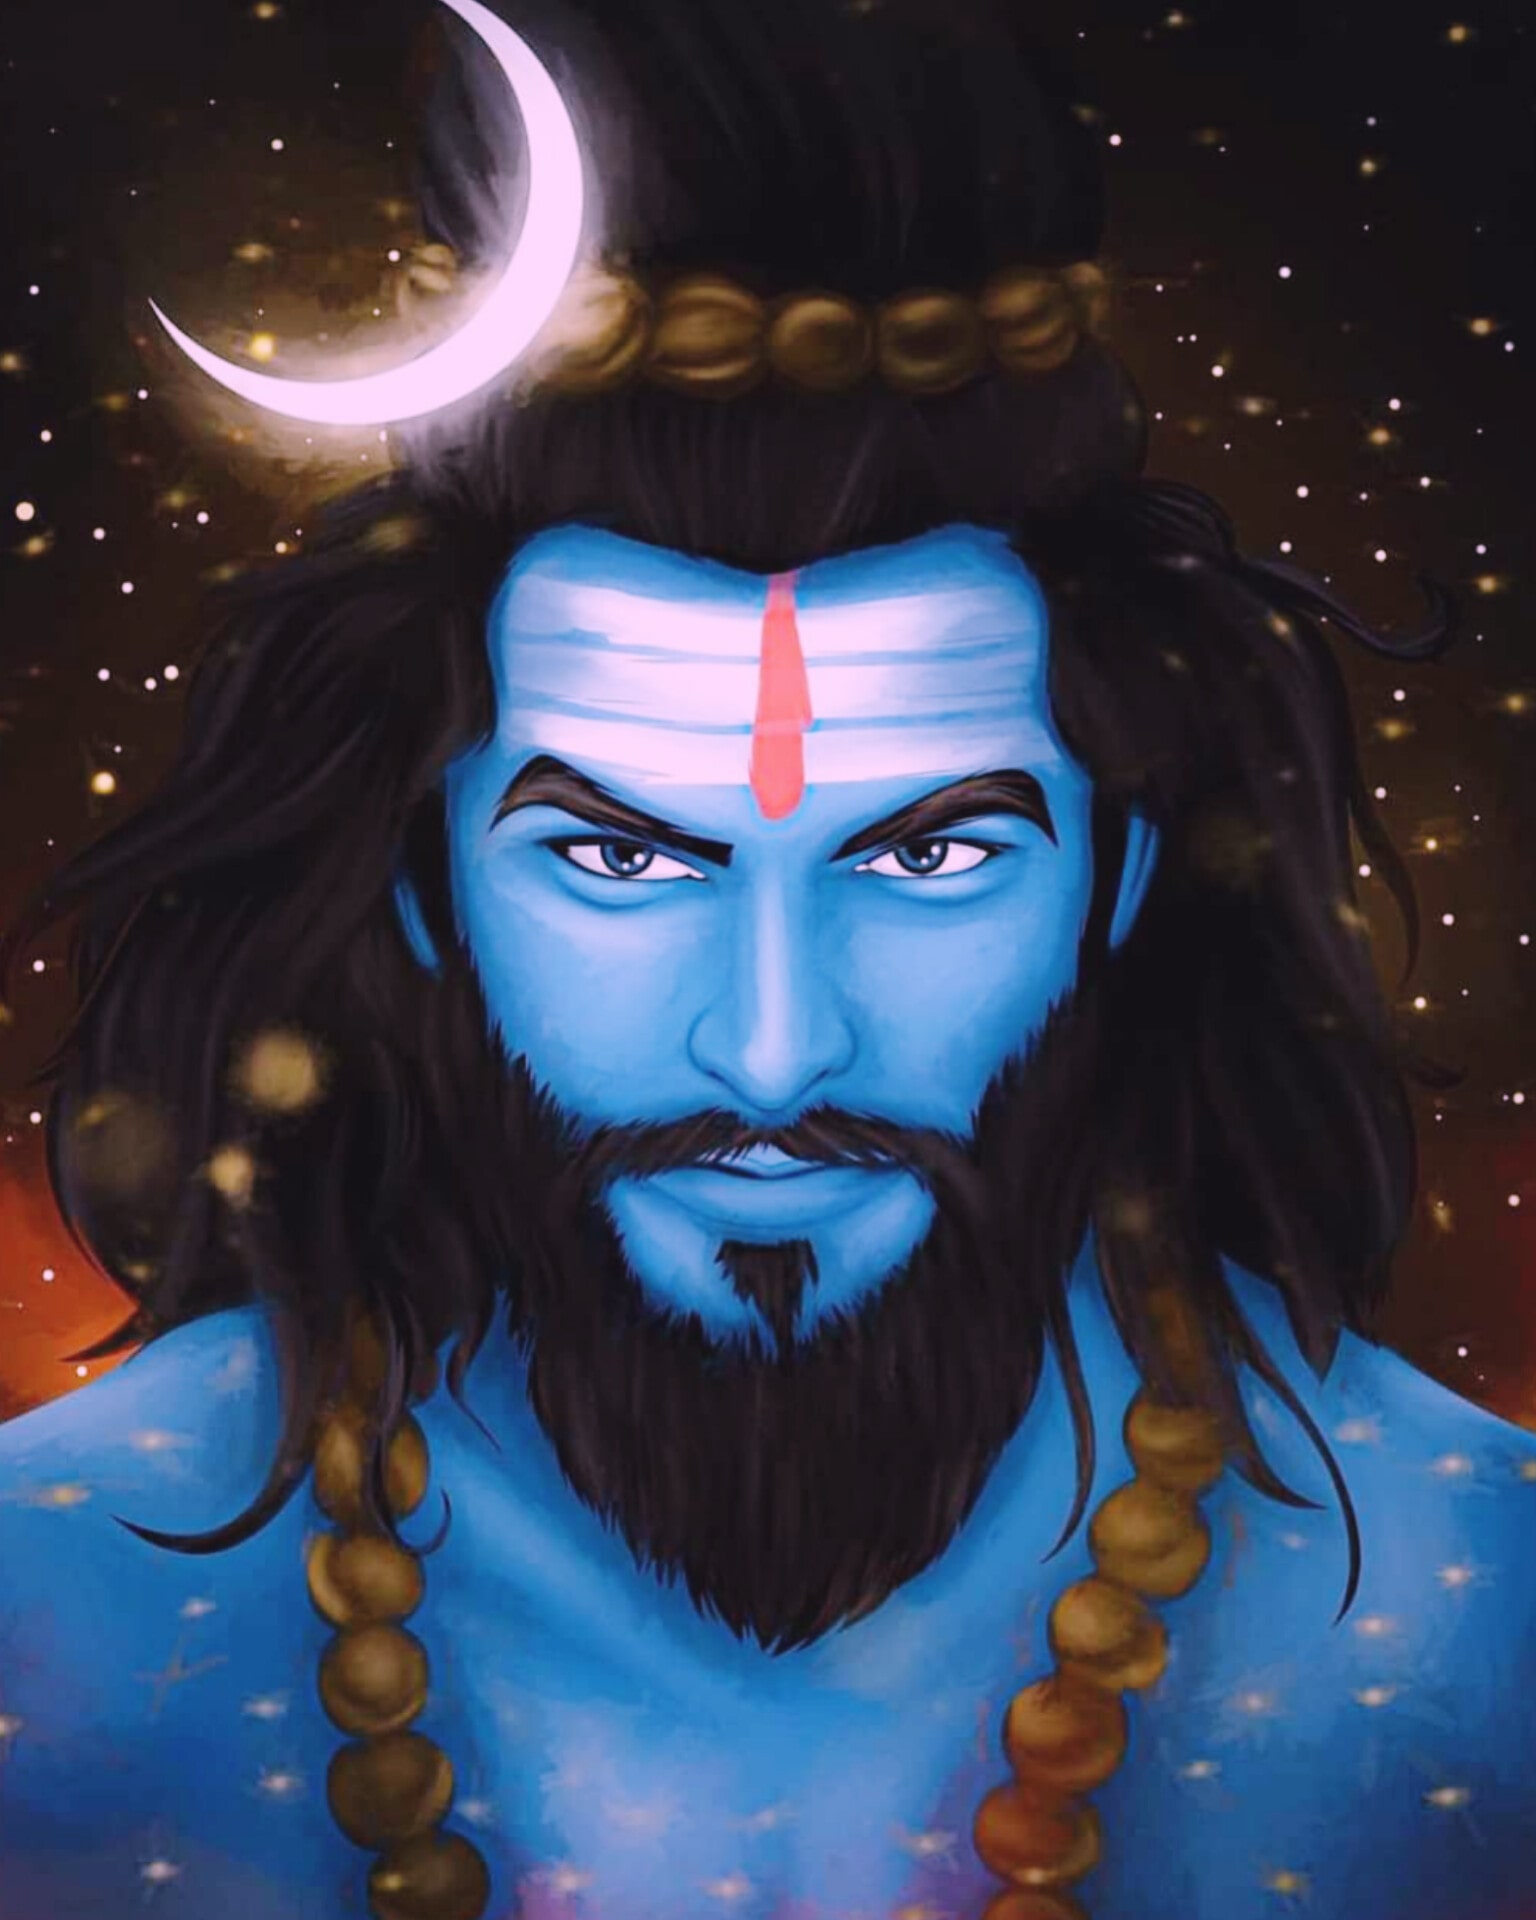 the-symbolism-of-the-three-lines-on-lord-shiva-s-forehead-by-akshaya